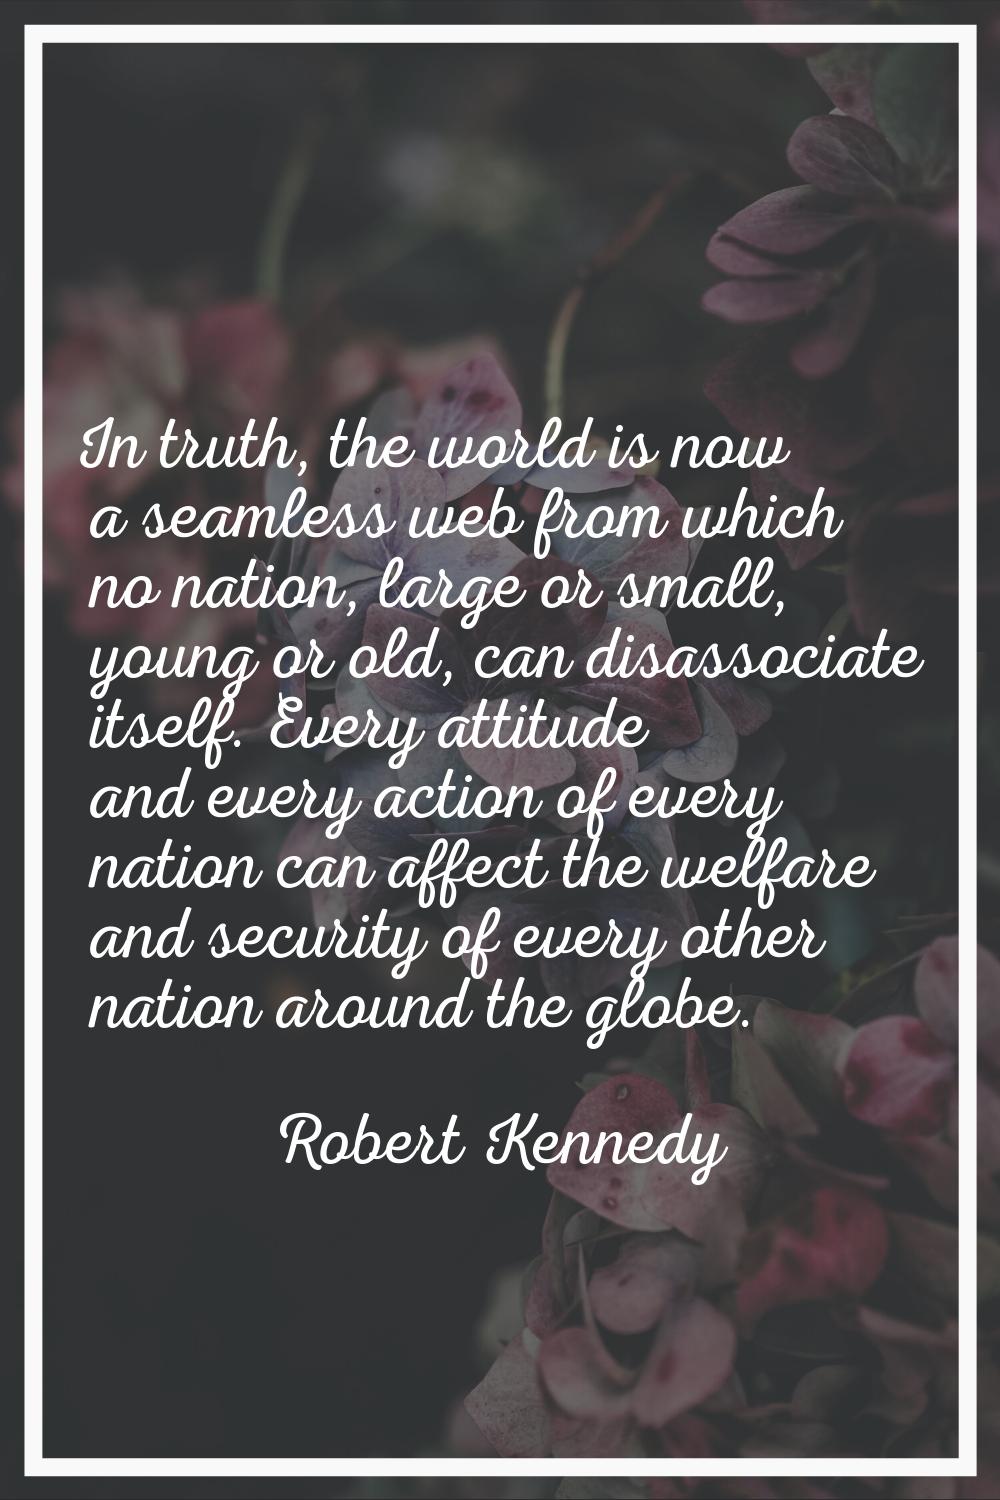 In truth, the world is now a seamless web from which no nation, large or small, young or old, can d